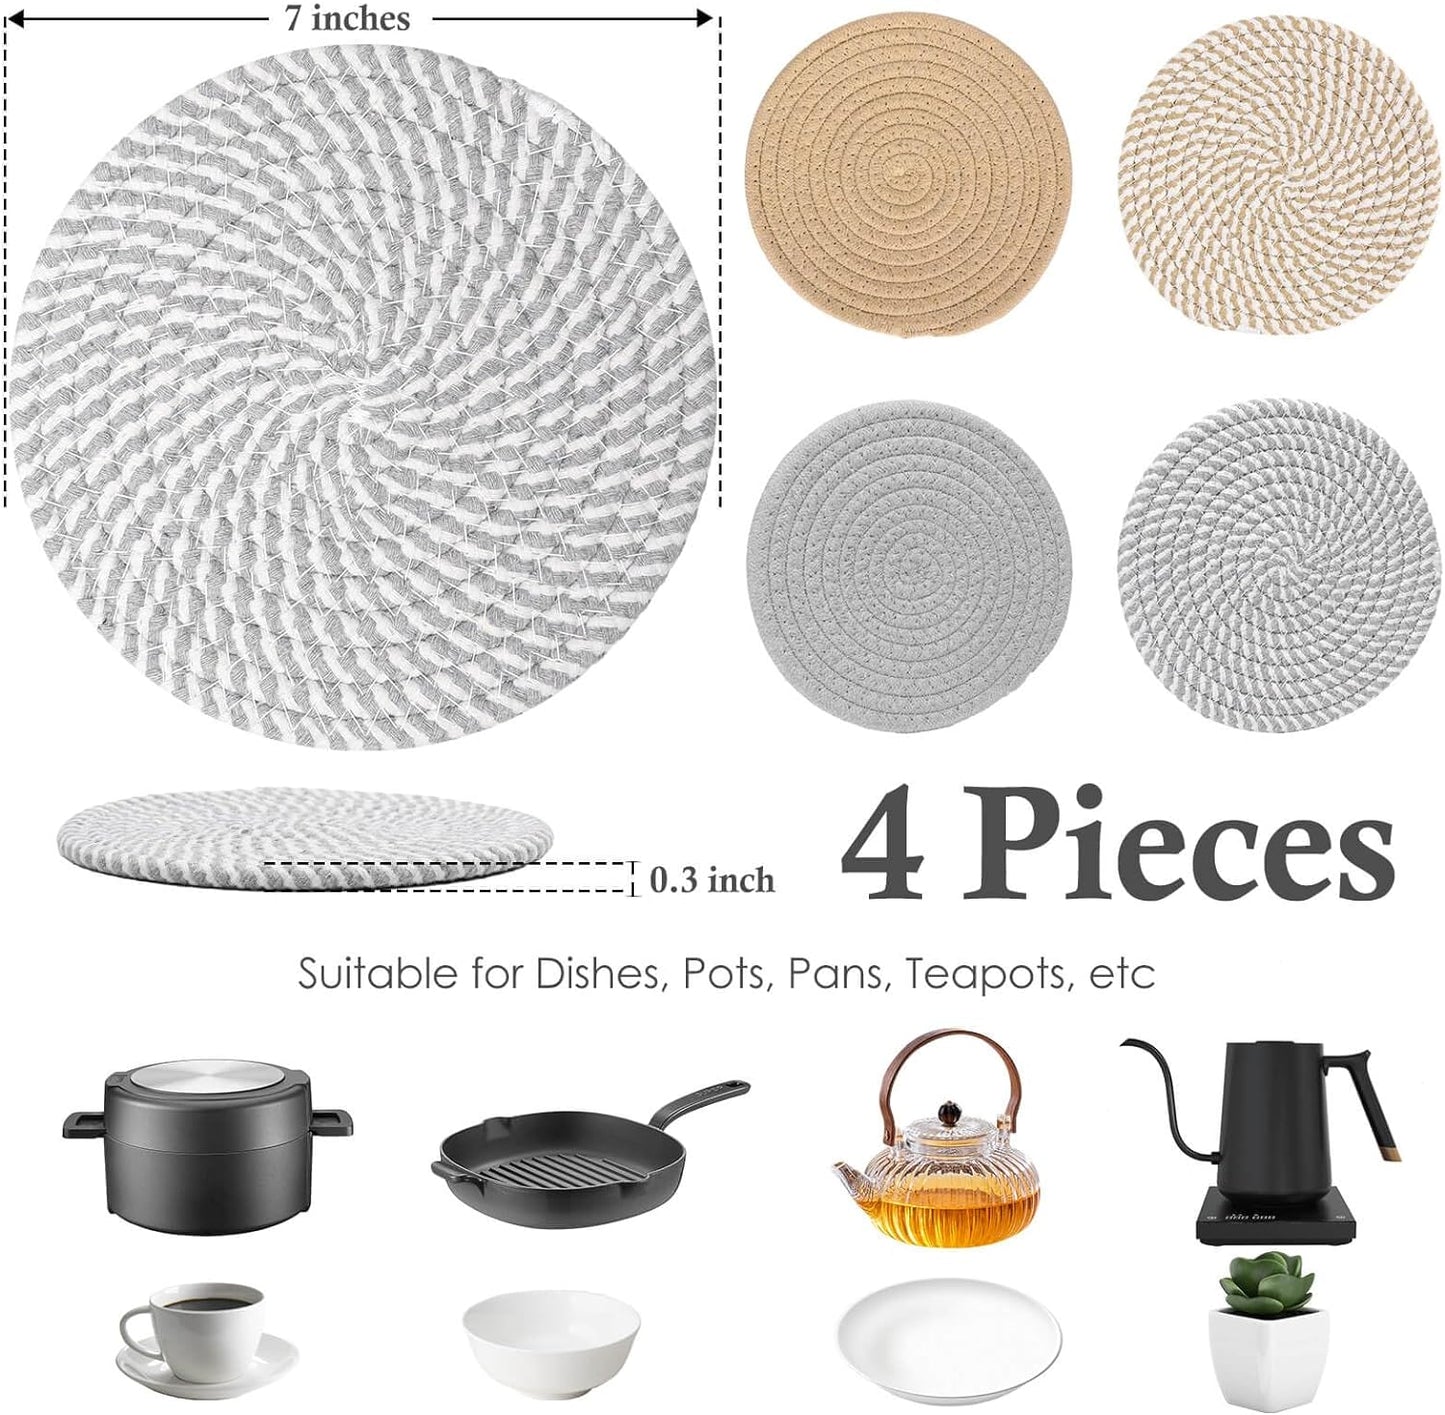 7" Trivets for Hot Dishes, Hot Pots and Pans, 4 Heat Resistant Hot Pads, Pot Holders for Kitchen, Hot Plate Mats for Kitchen Decor and Essentials(Gray&Brown)